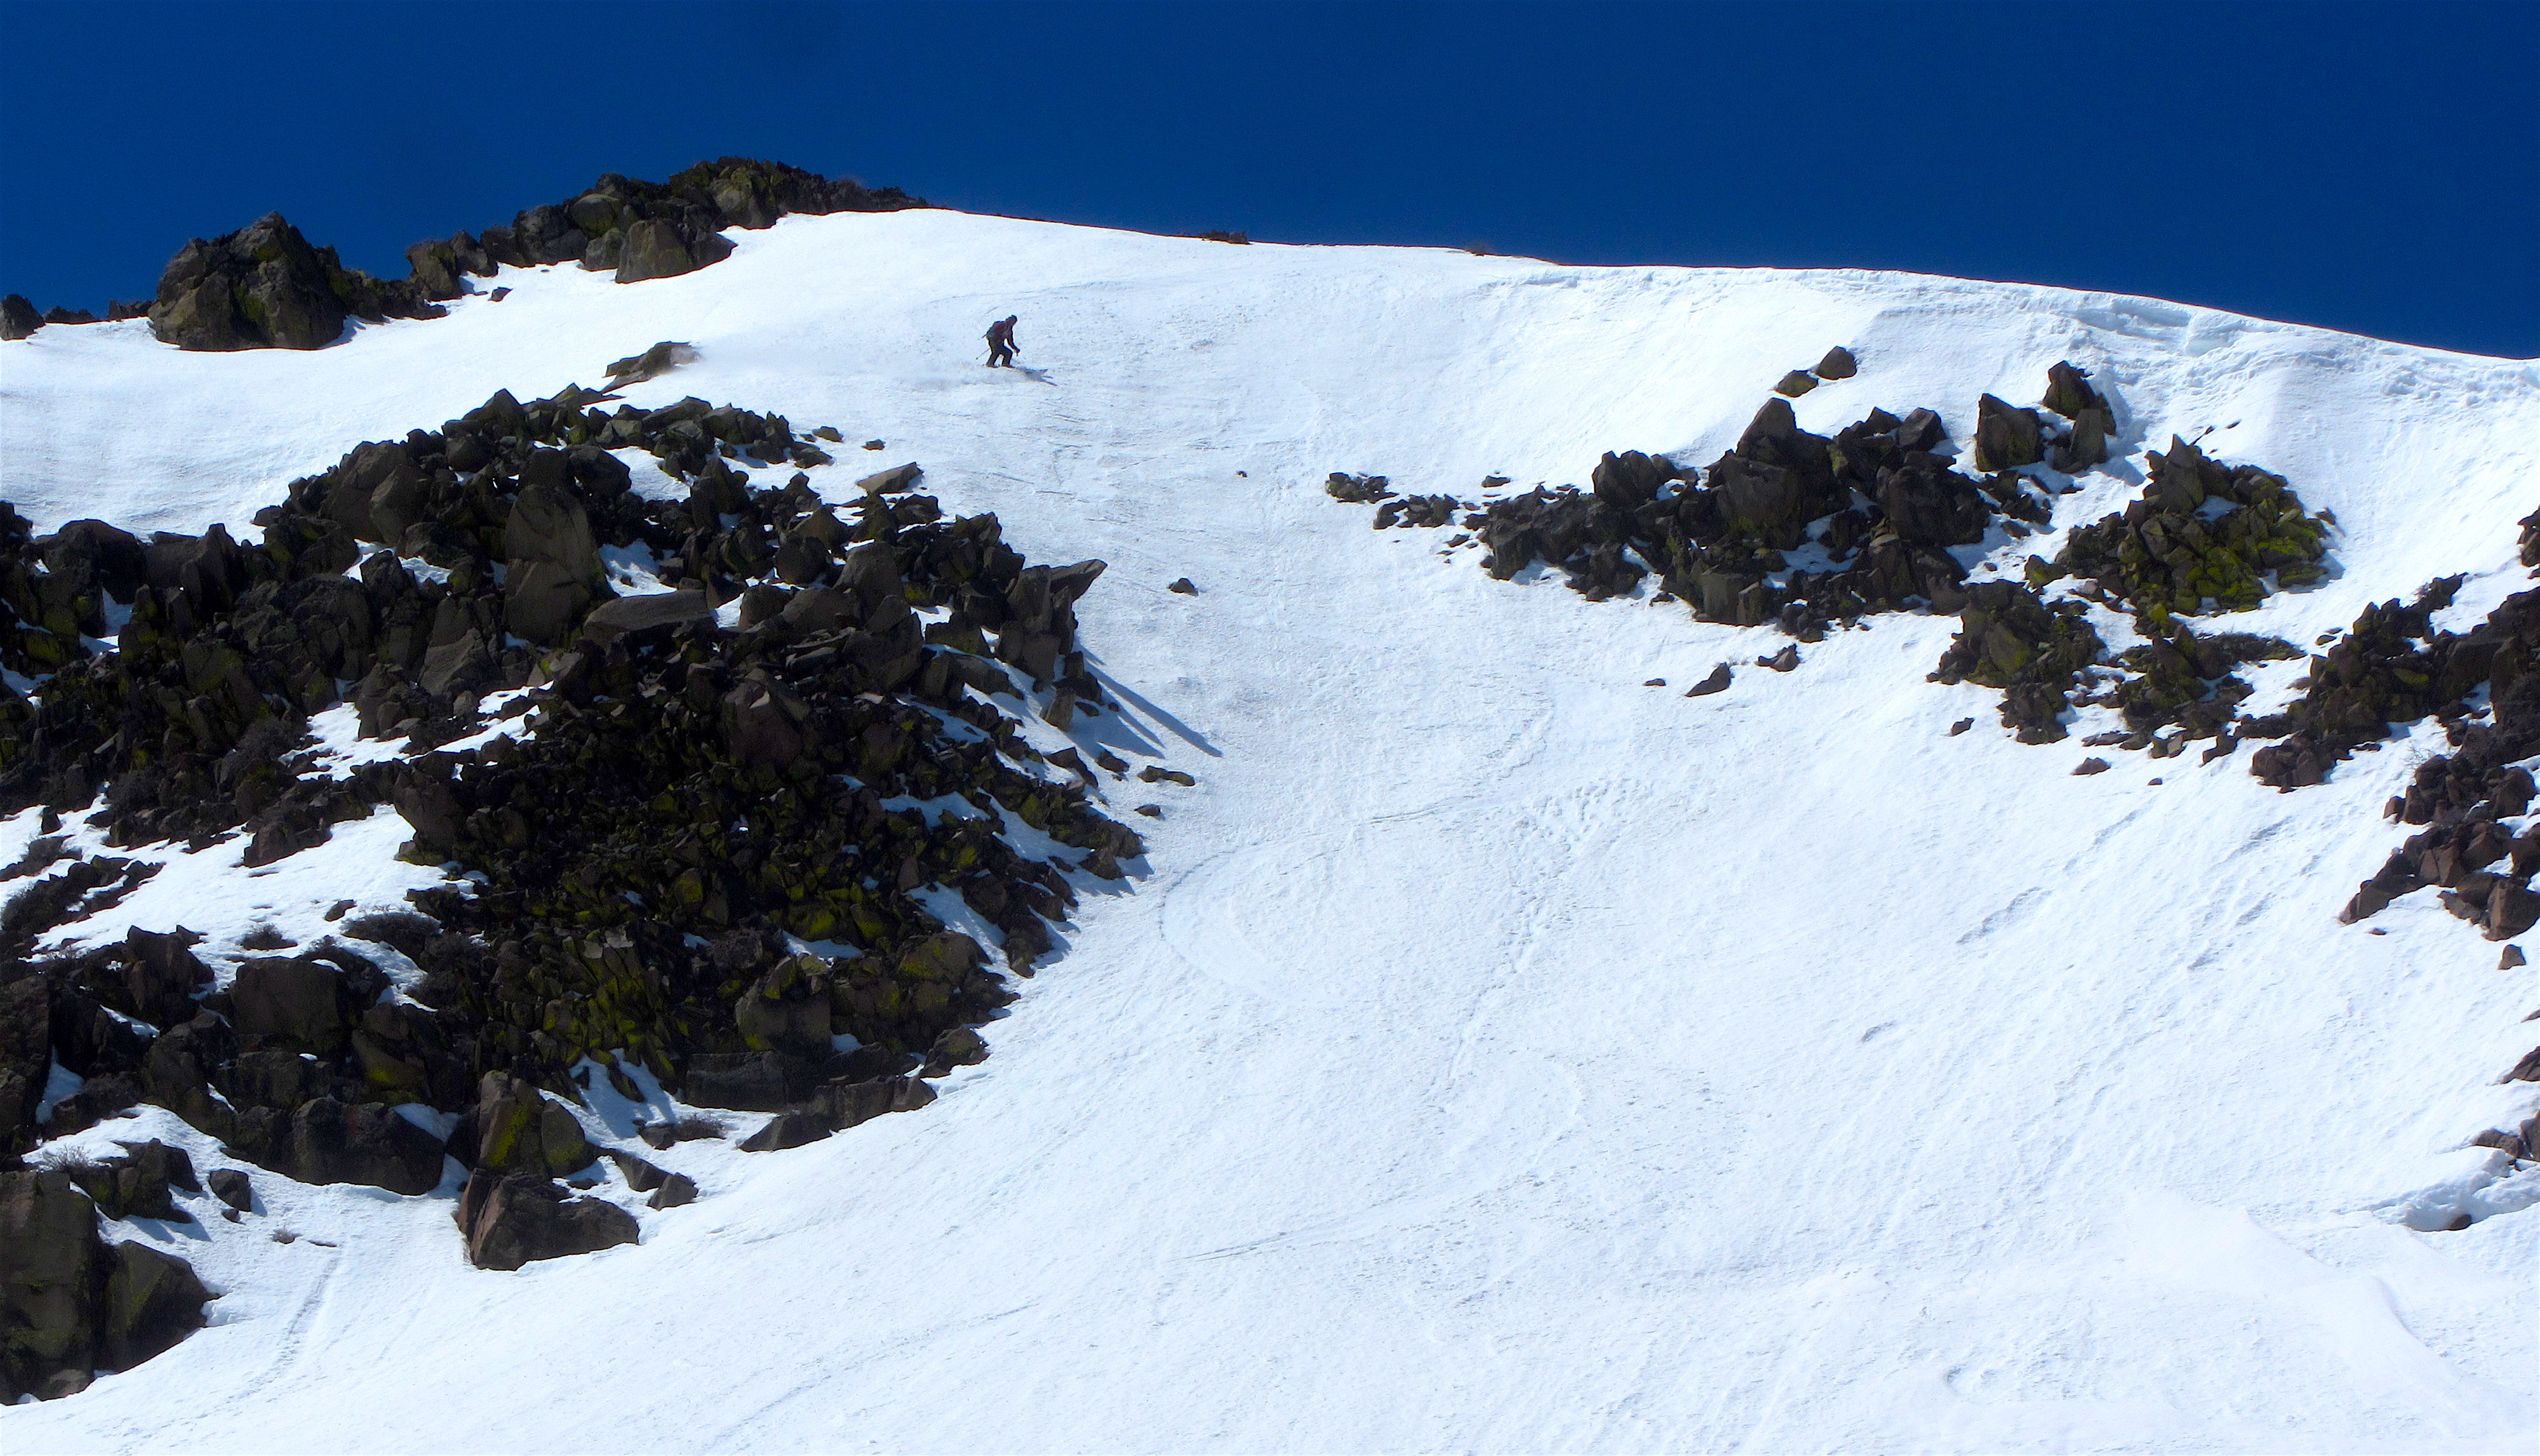 Rick dropping into the Comma Couloir today. photo: miles clark/snowbrains